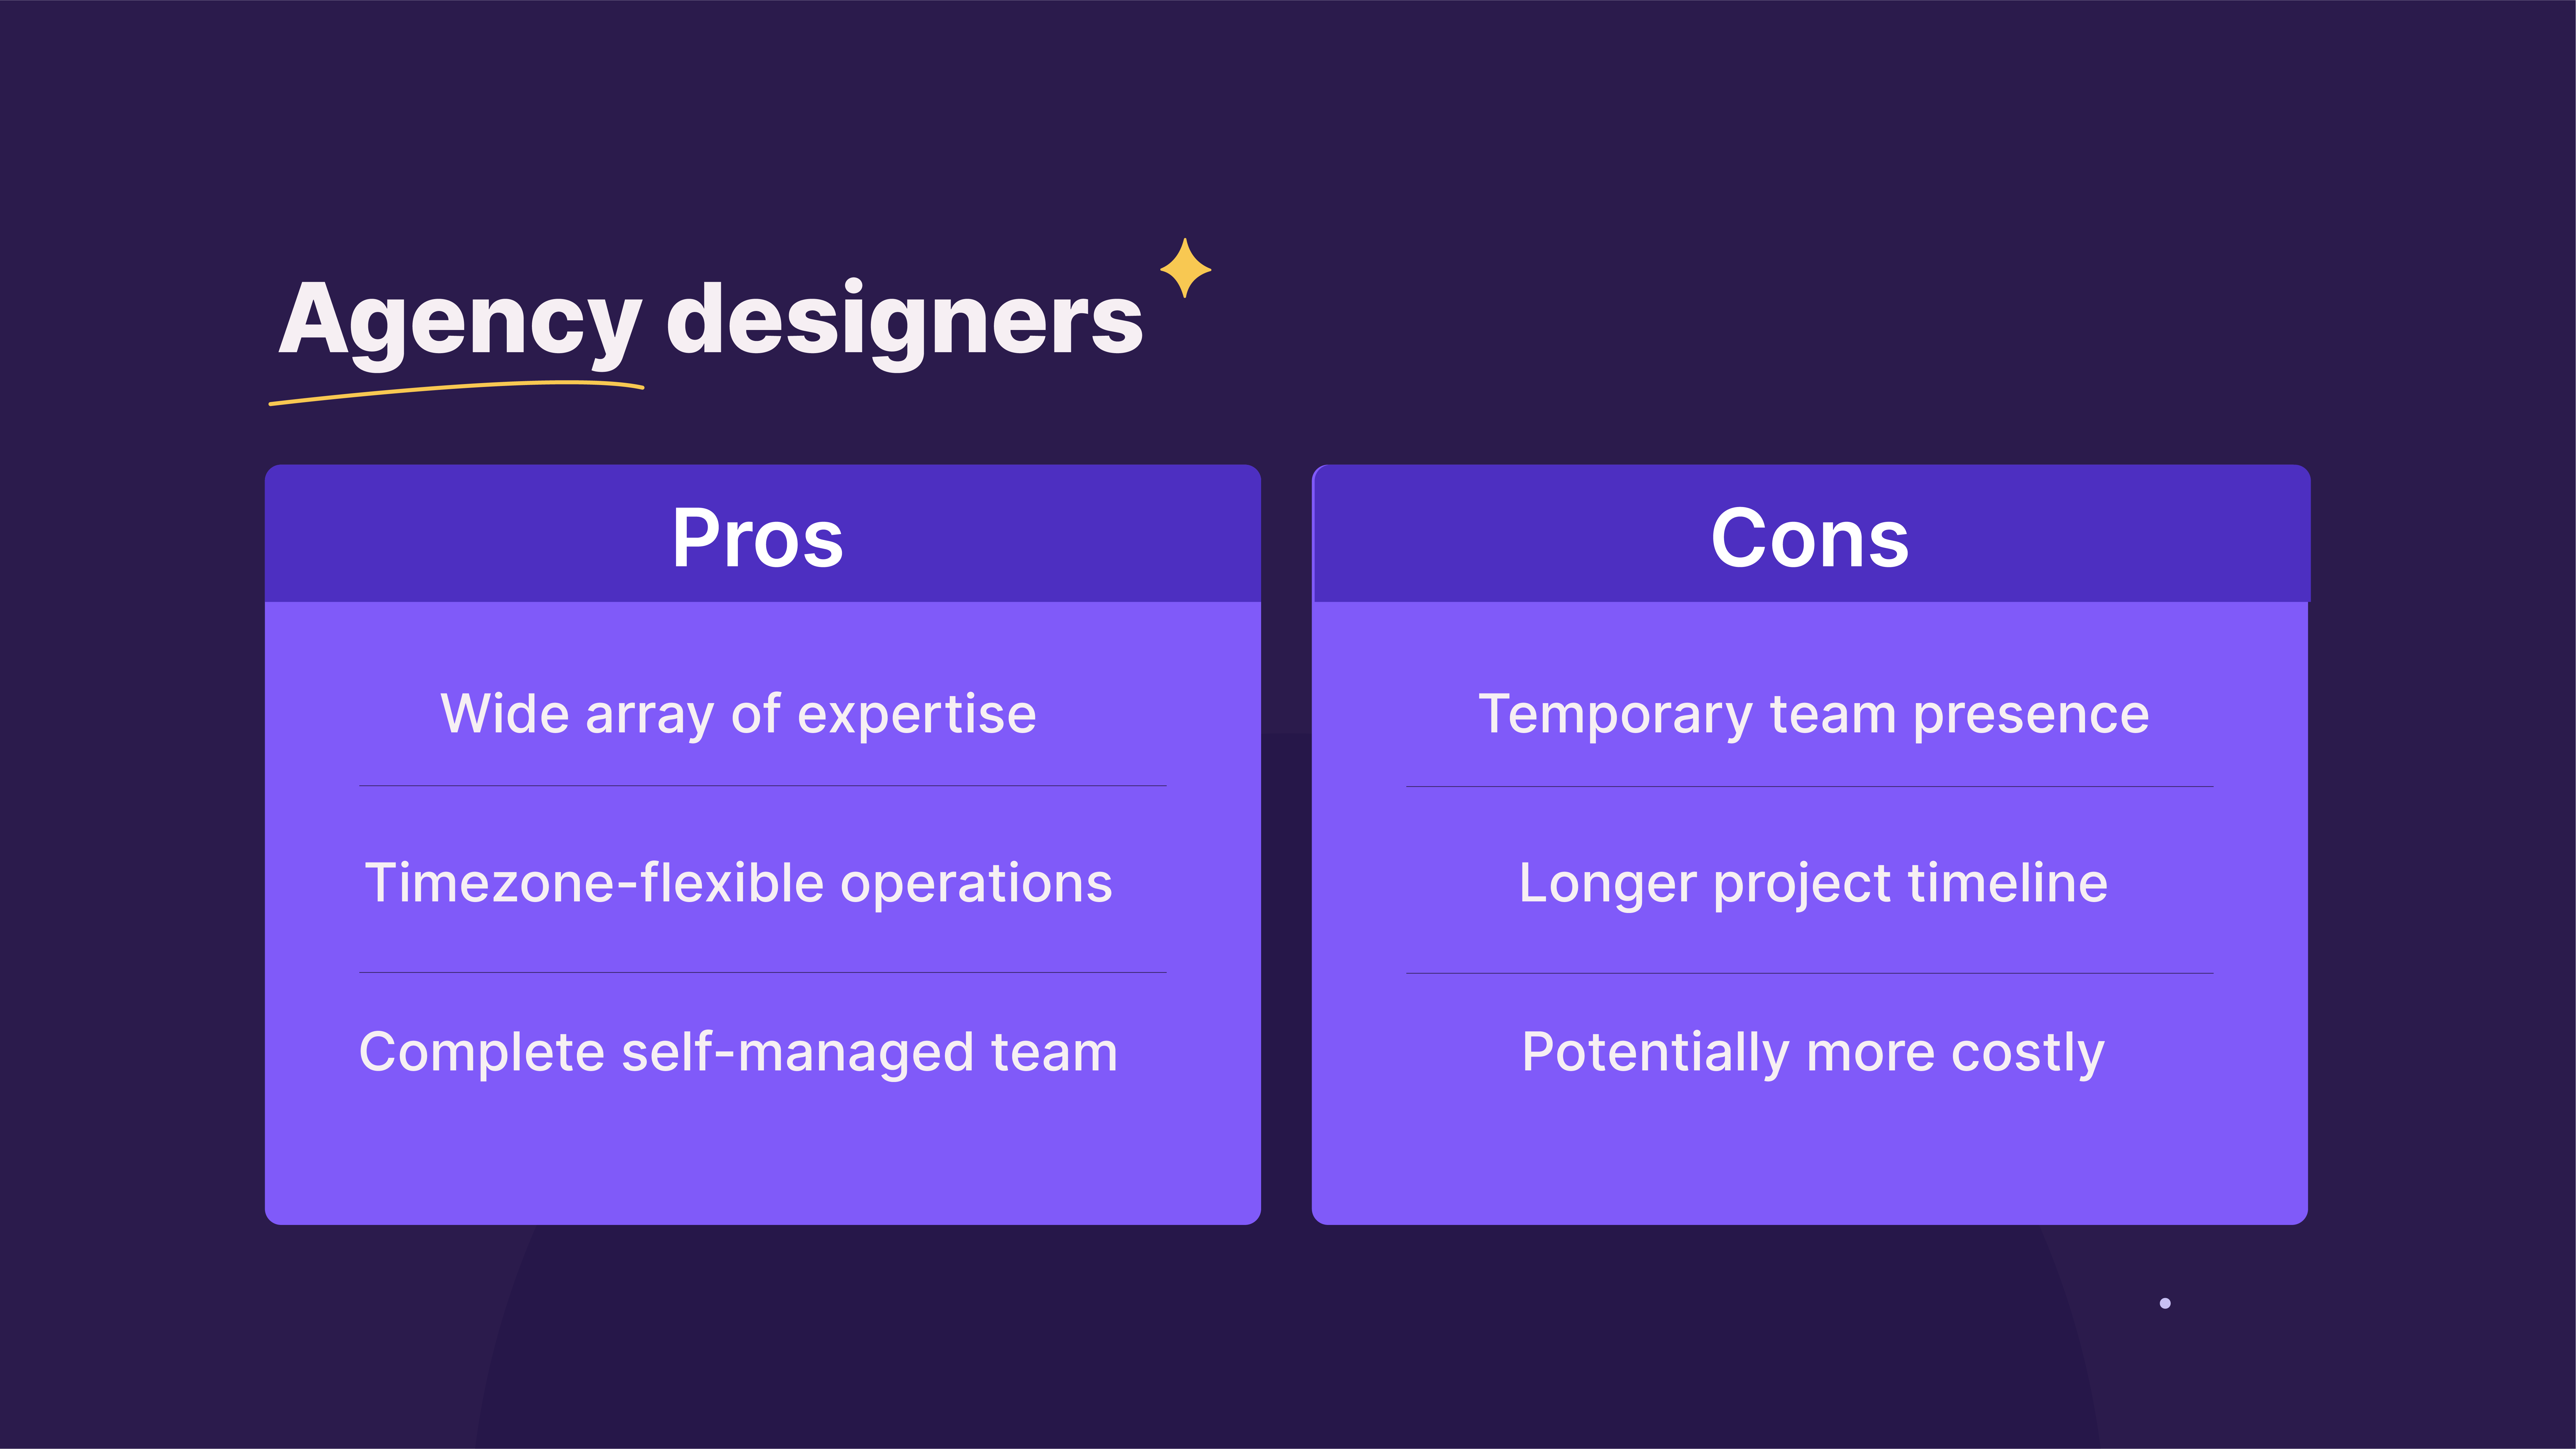 Pros and Cons of Agency Designers